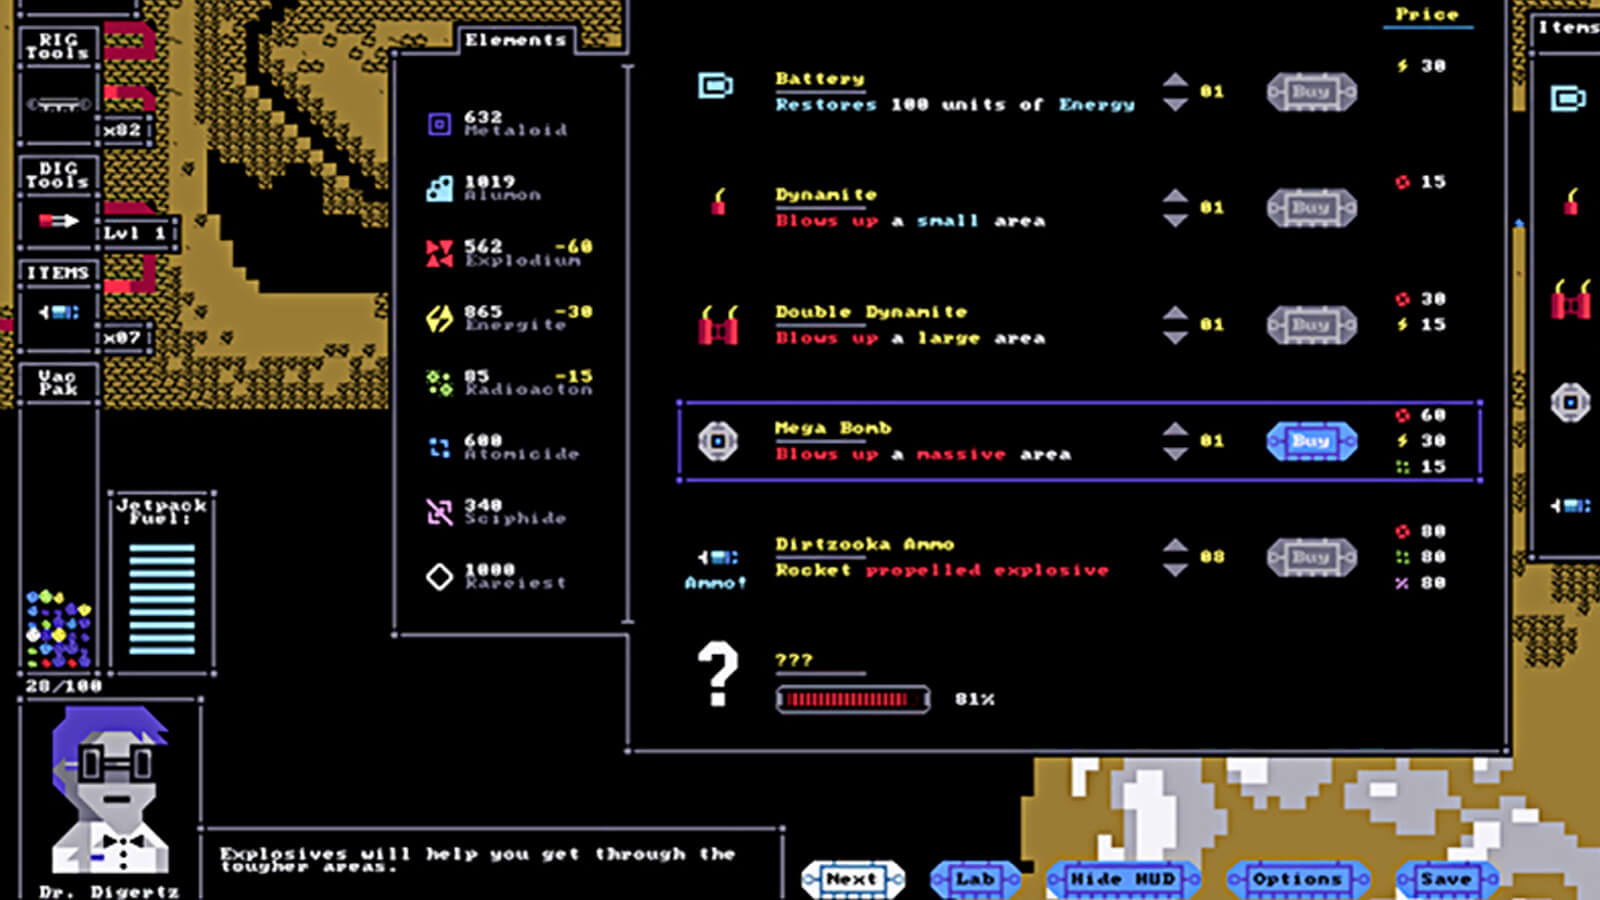 A menu screen displaying various items for purchase. 